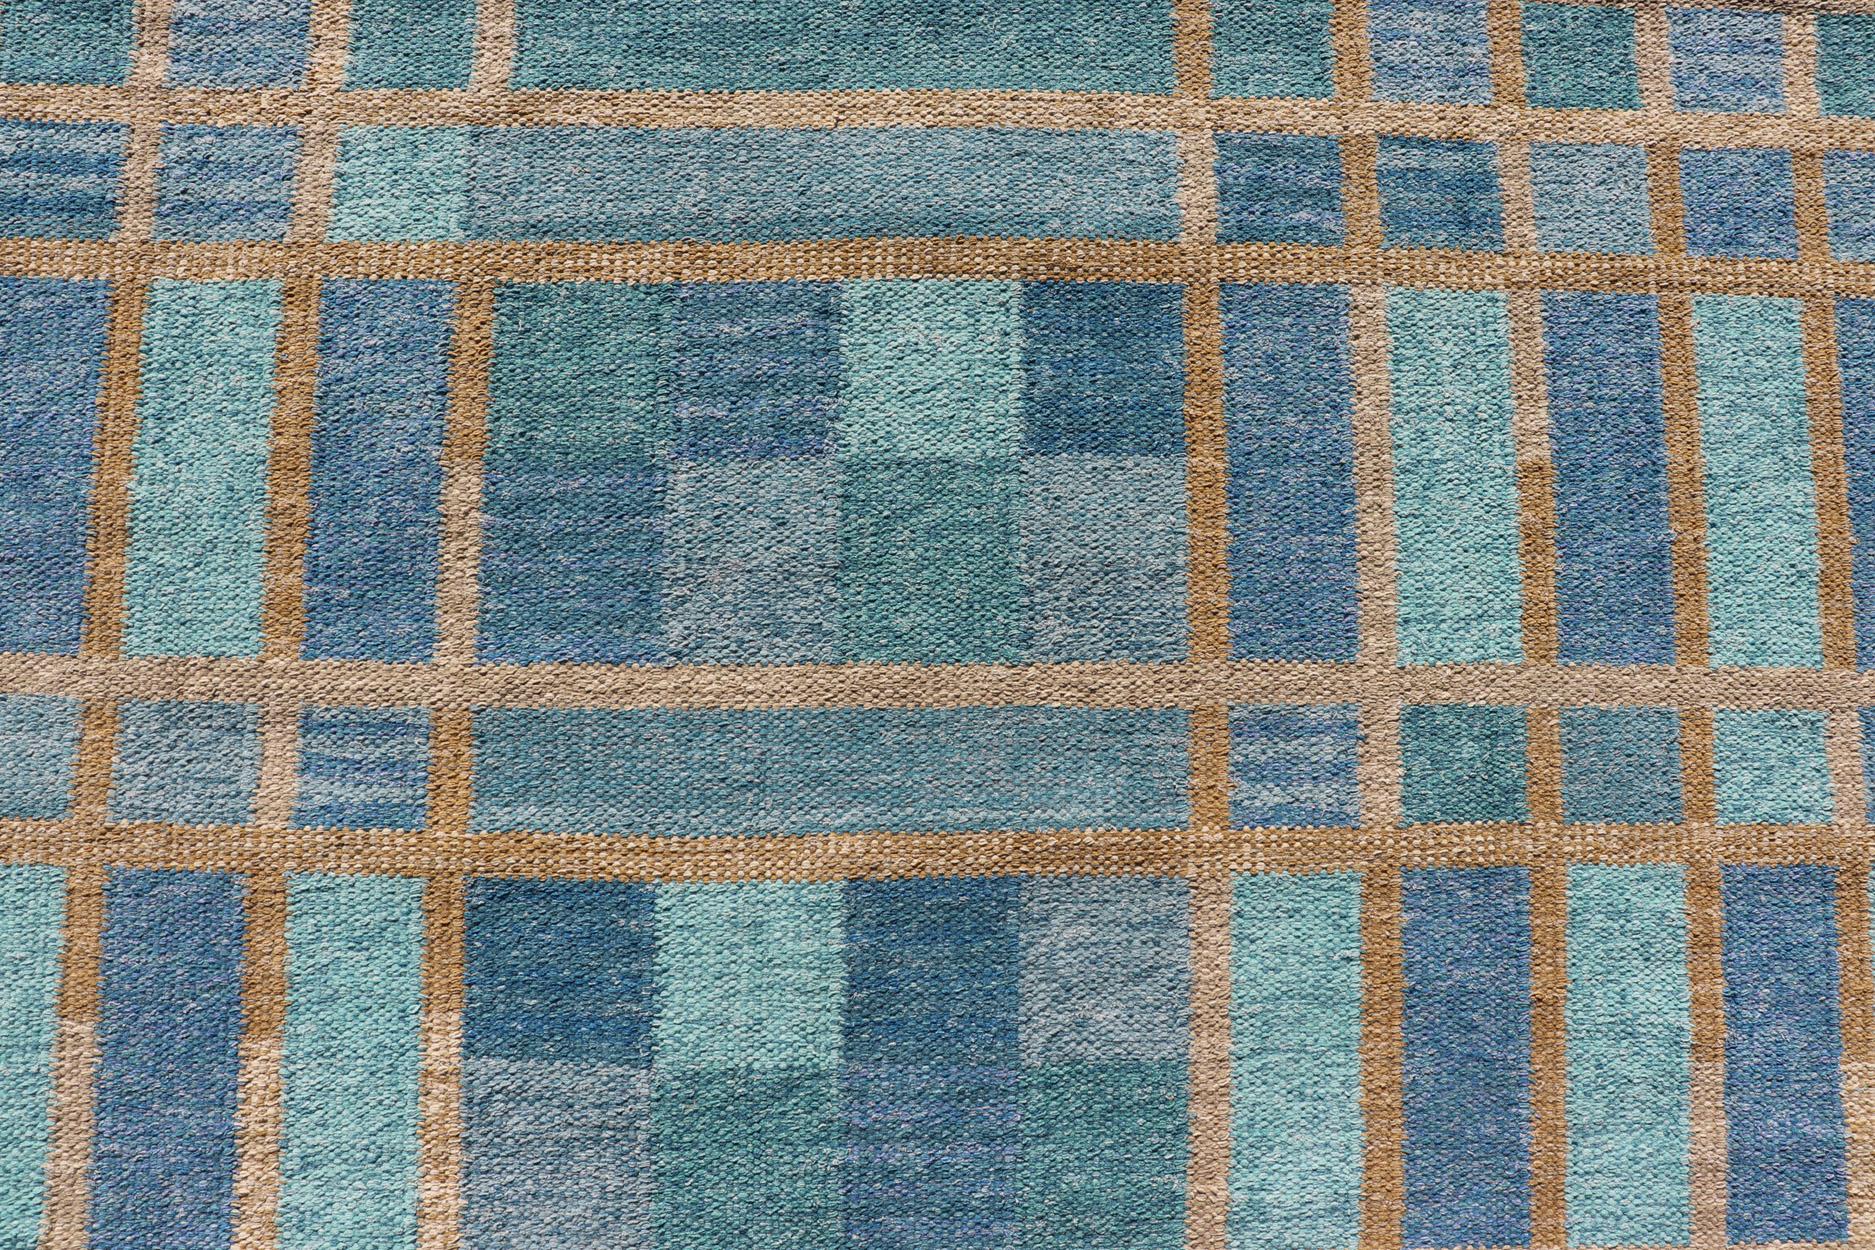 Wool Large Scandinavian Inspired Design Rug in Blue, Teal, Green, and Gold